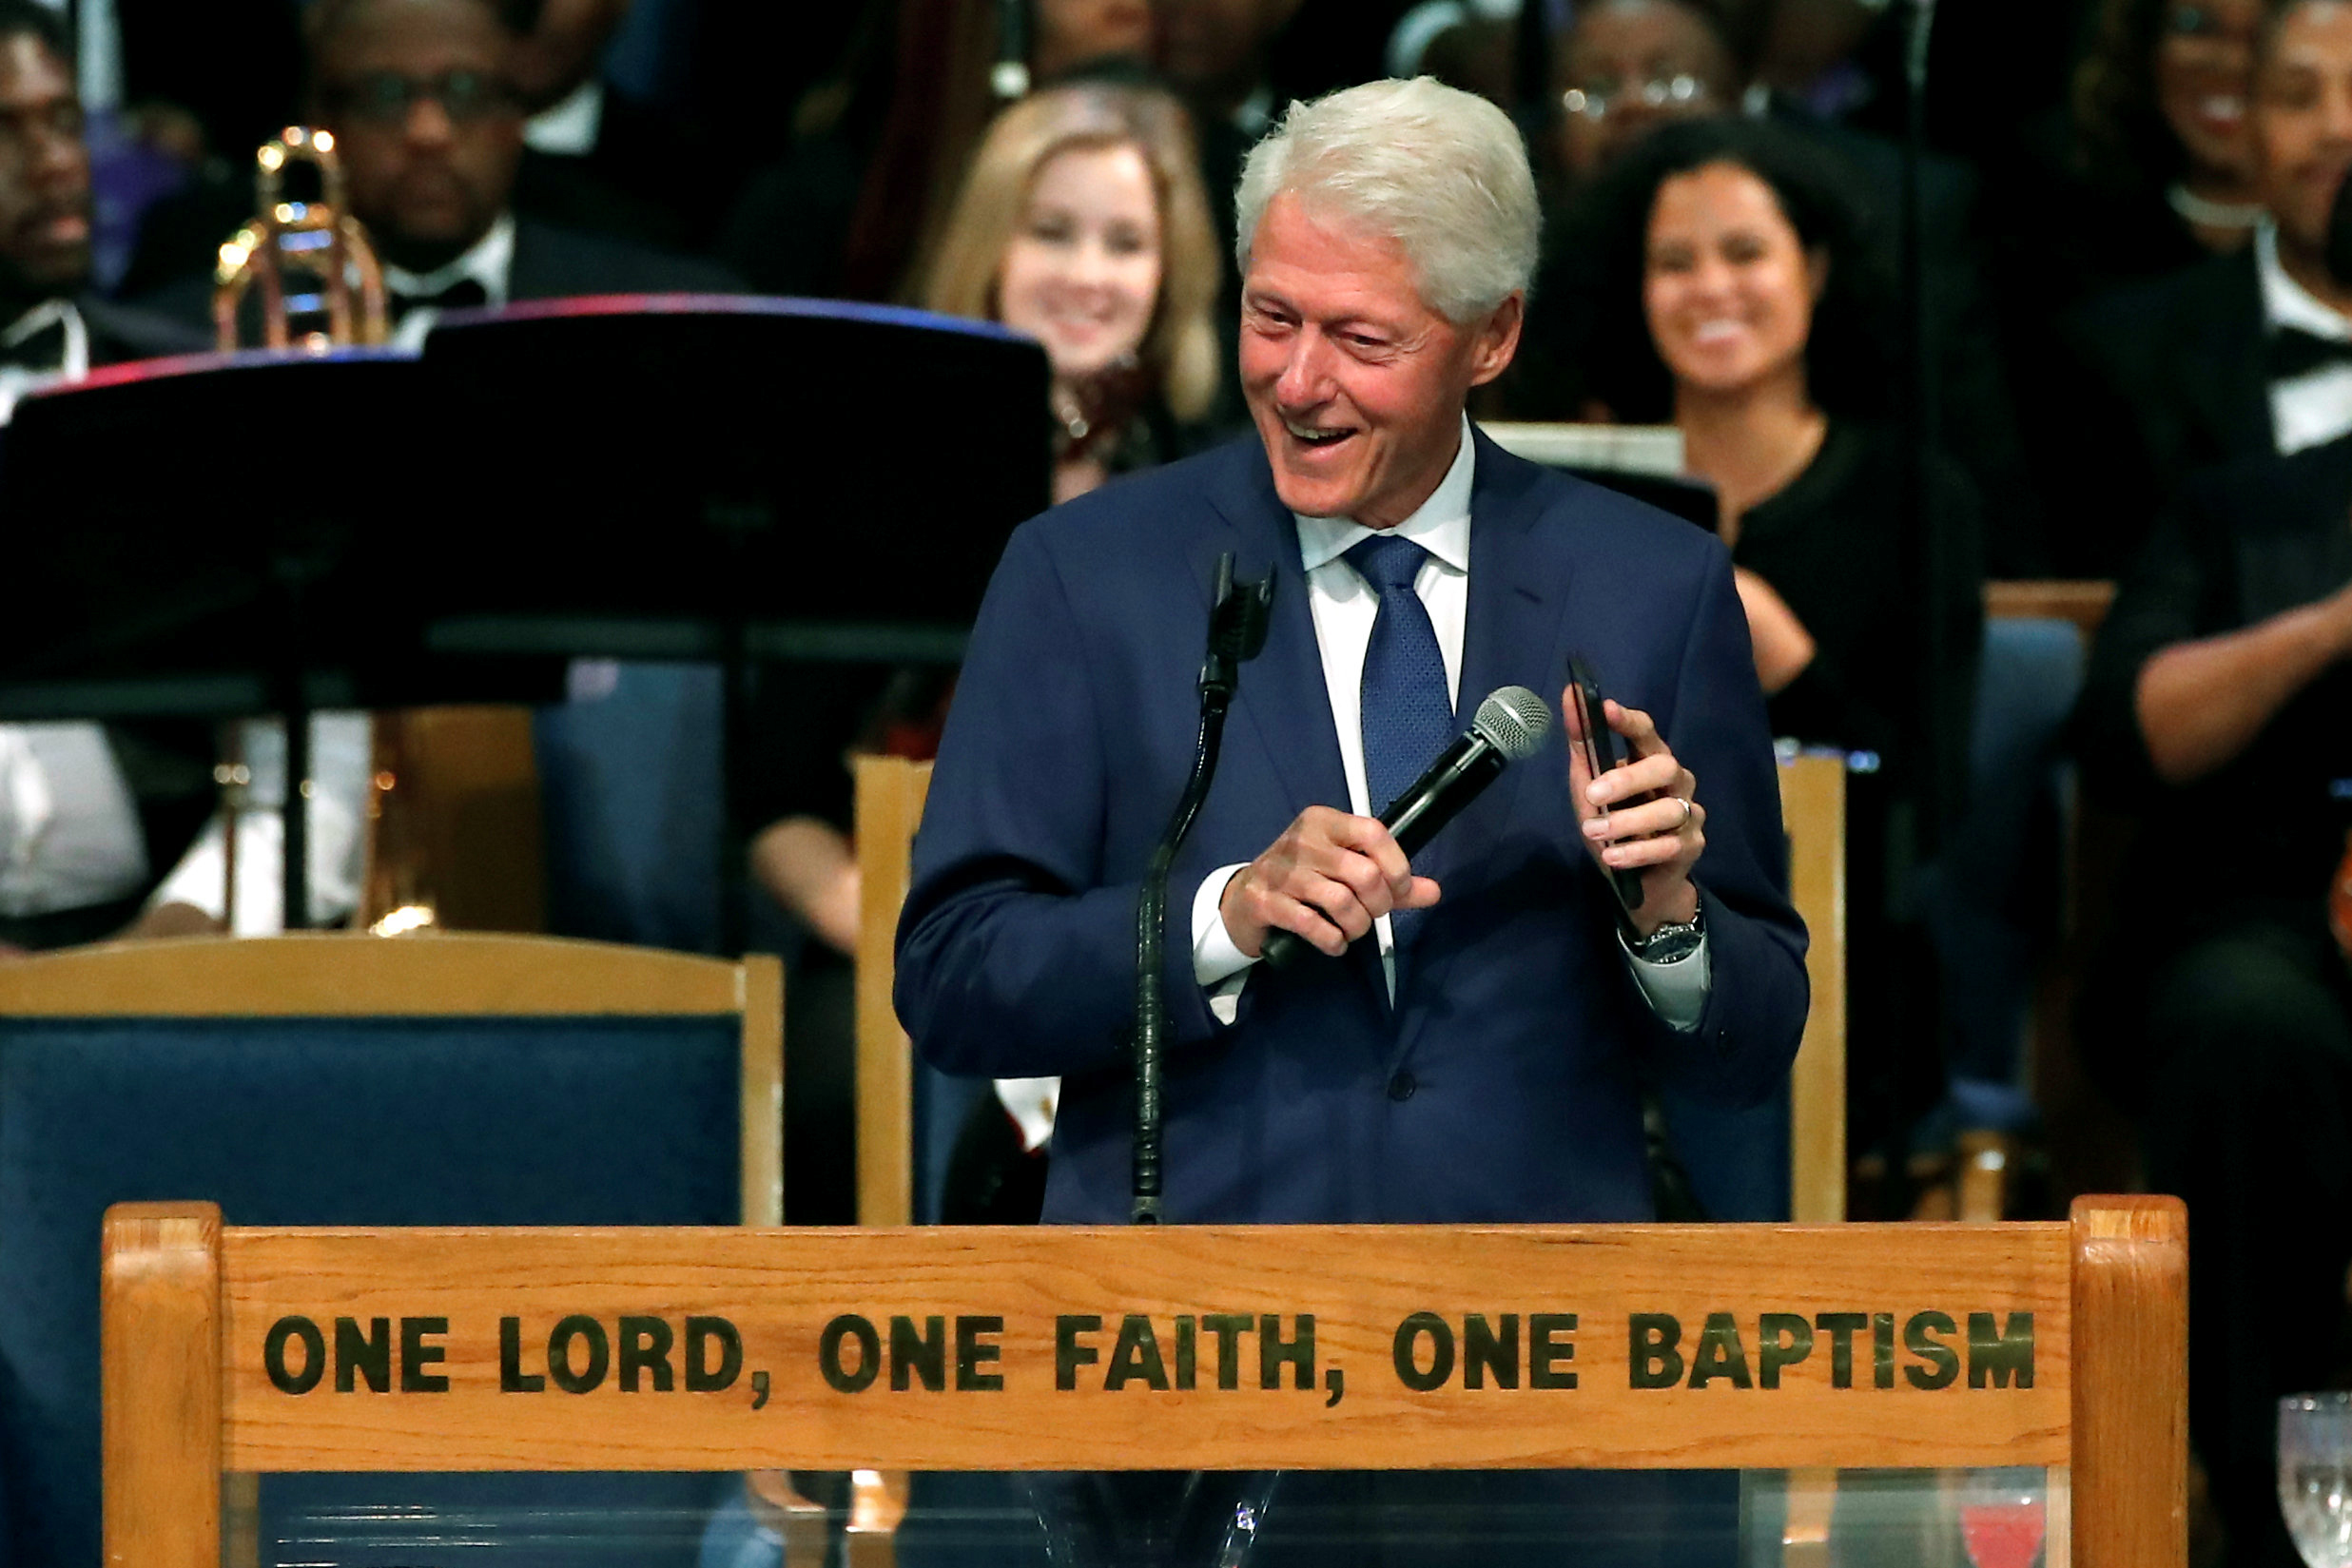 PHOTO: Former President Bill Clinton plays Aretha Franklin music on his mobile phone while speaking at the funeral service for the late singer at the Greater Grace Temple in Detroit, Aug. 31, 2018.